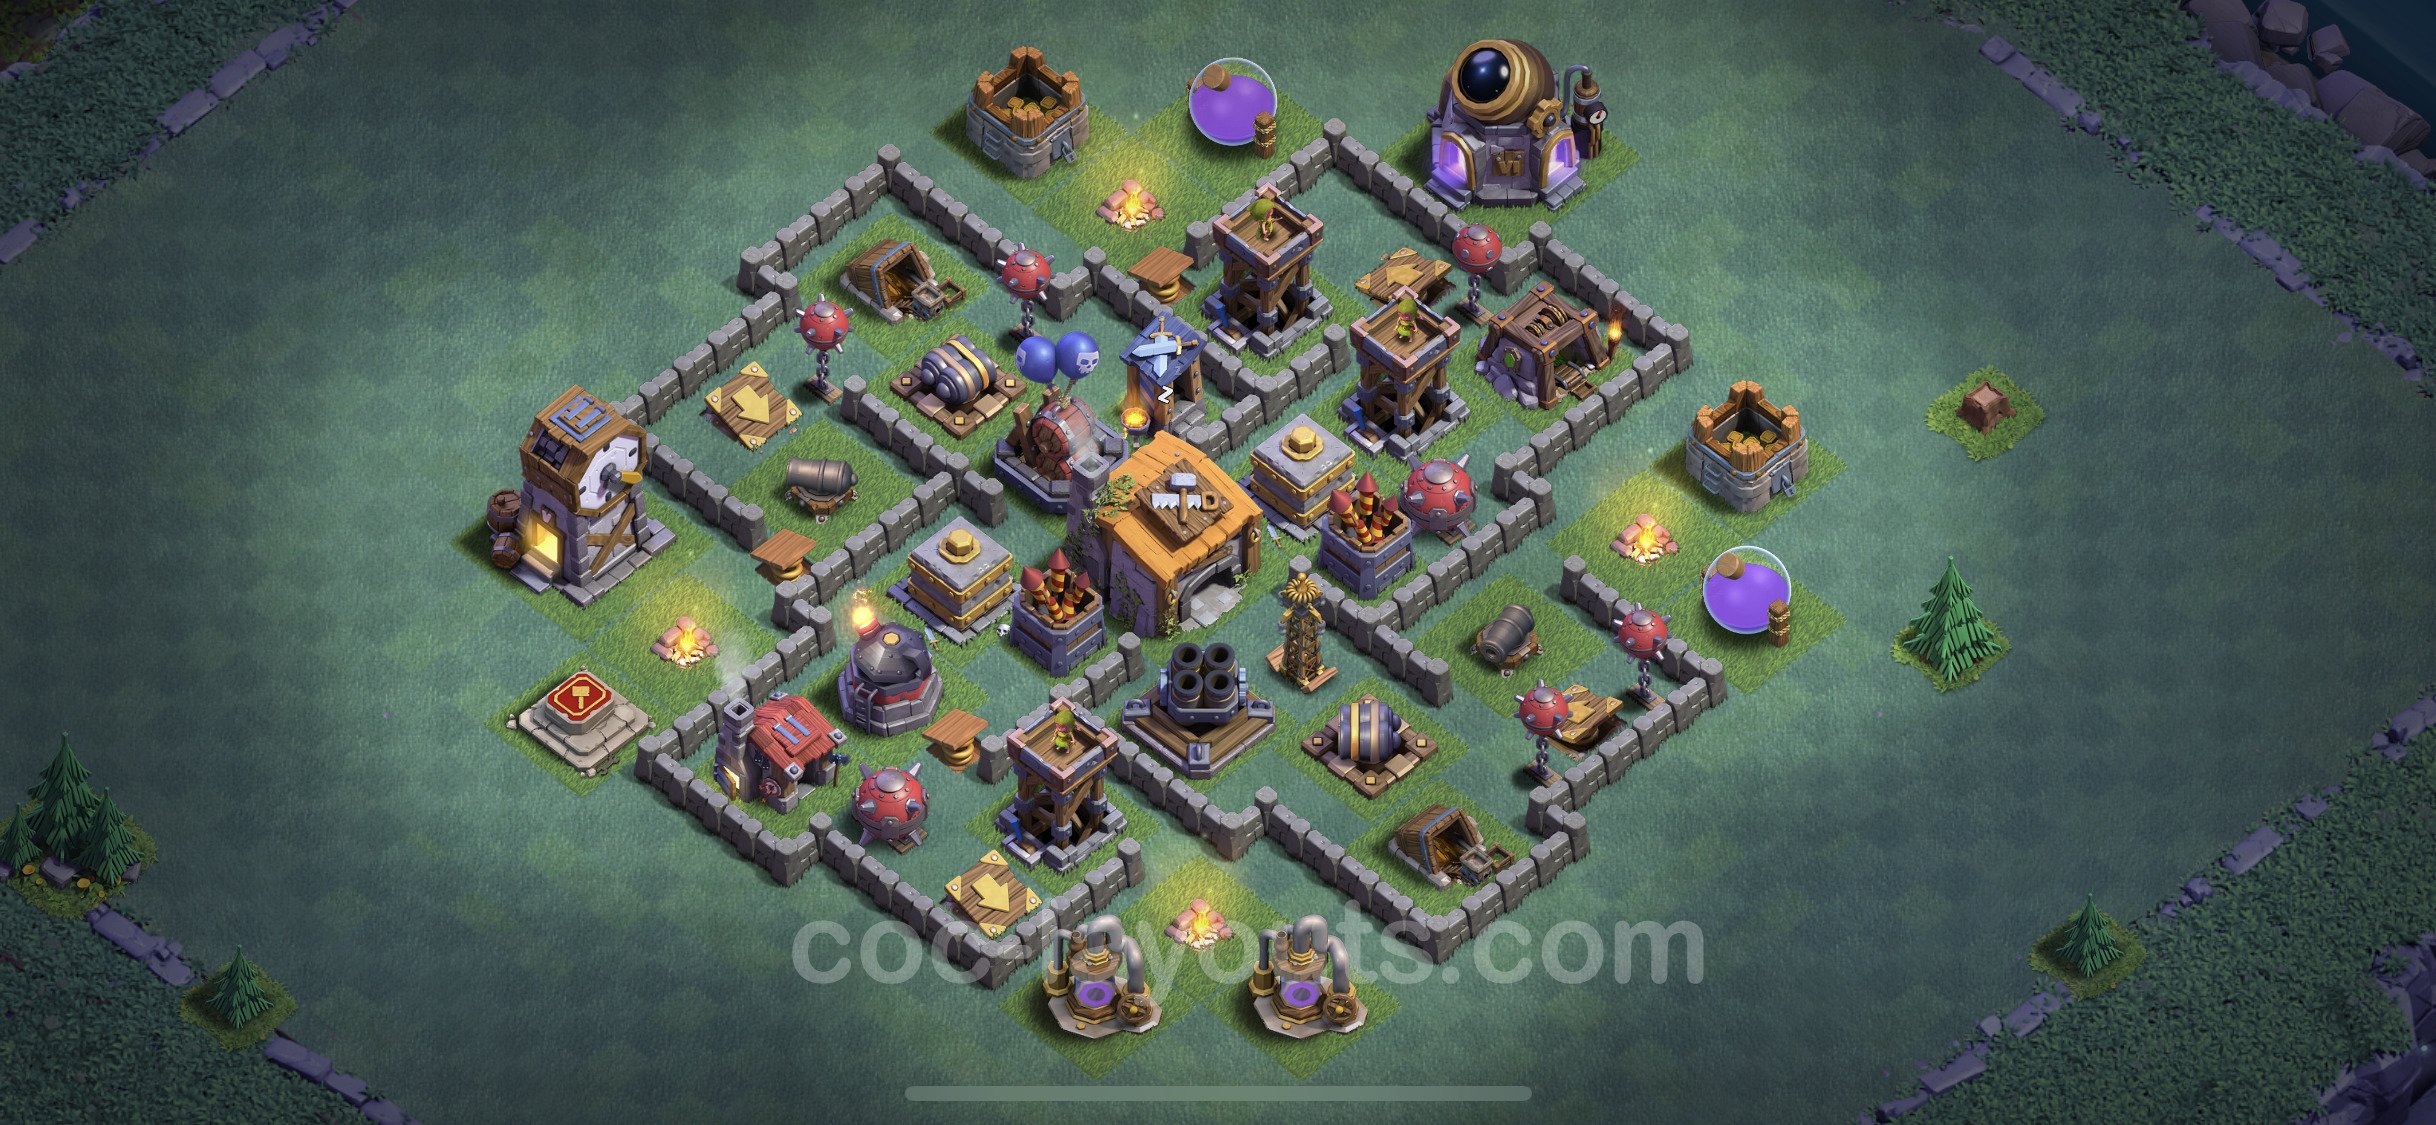 Clash of clans builder hall 6 base